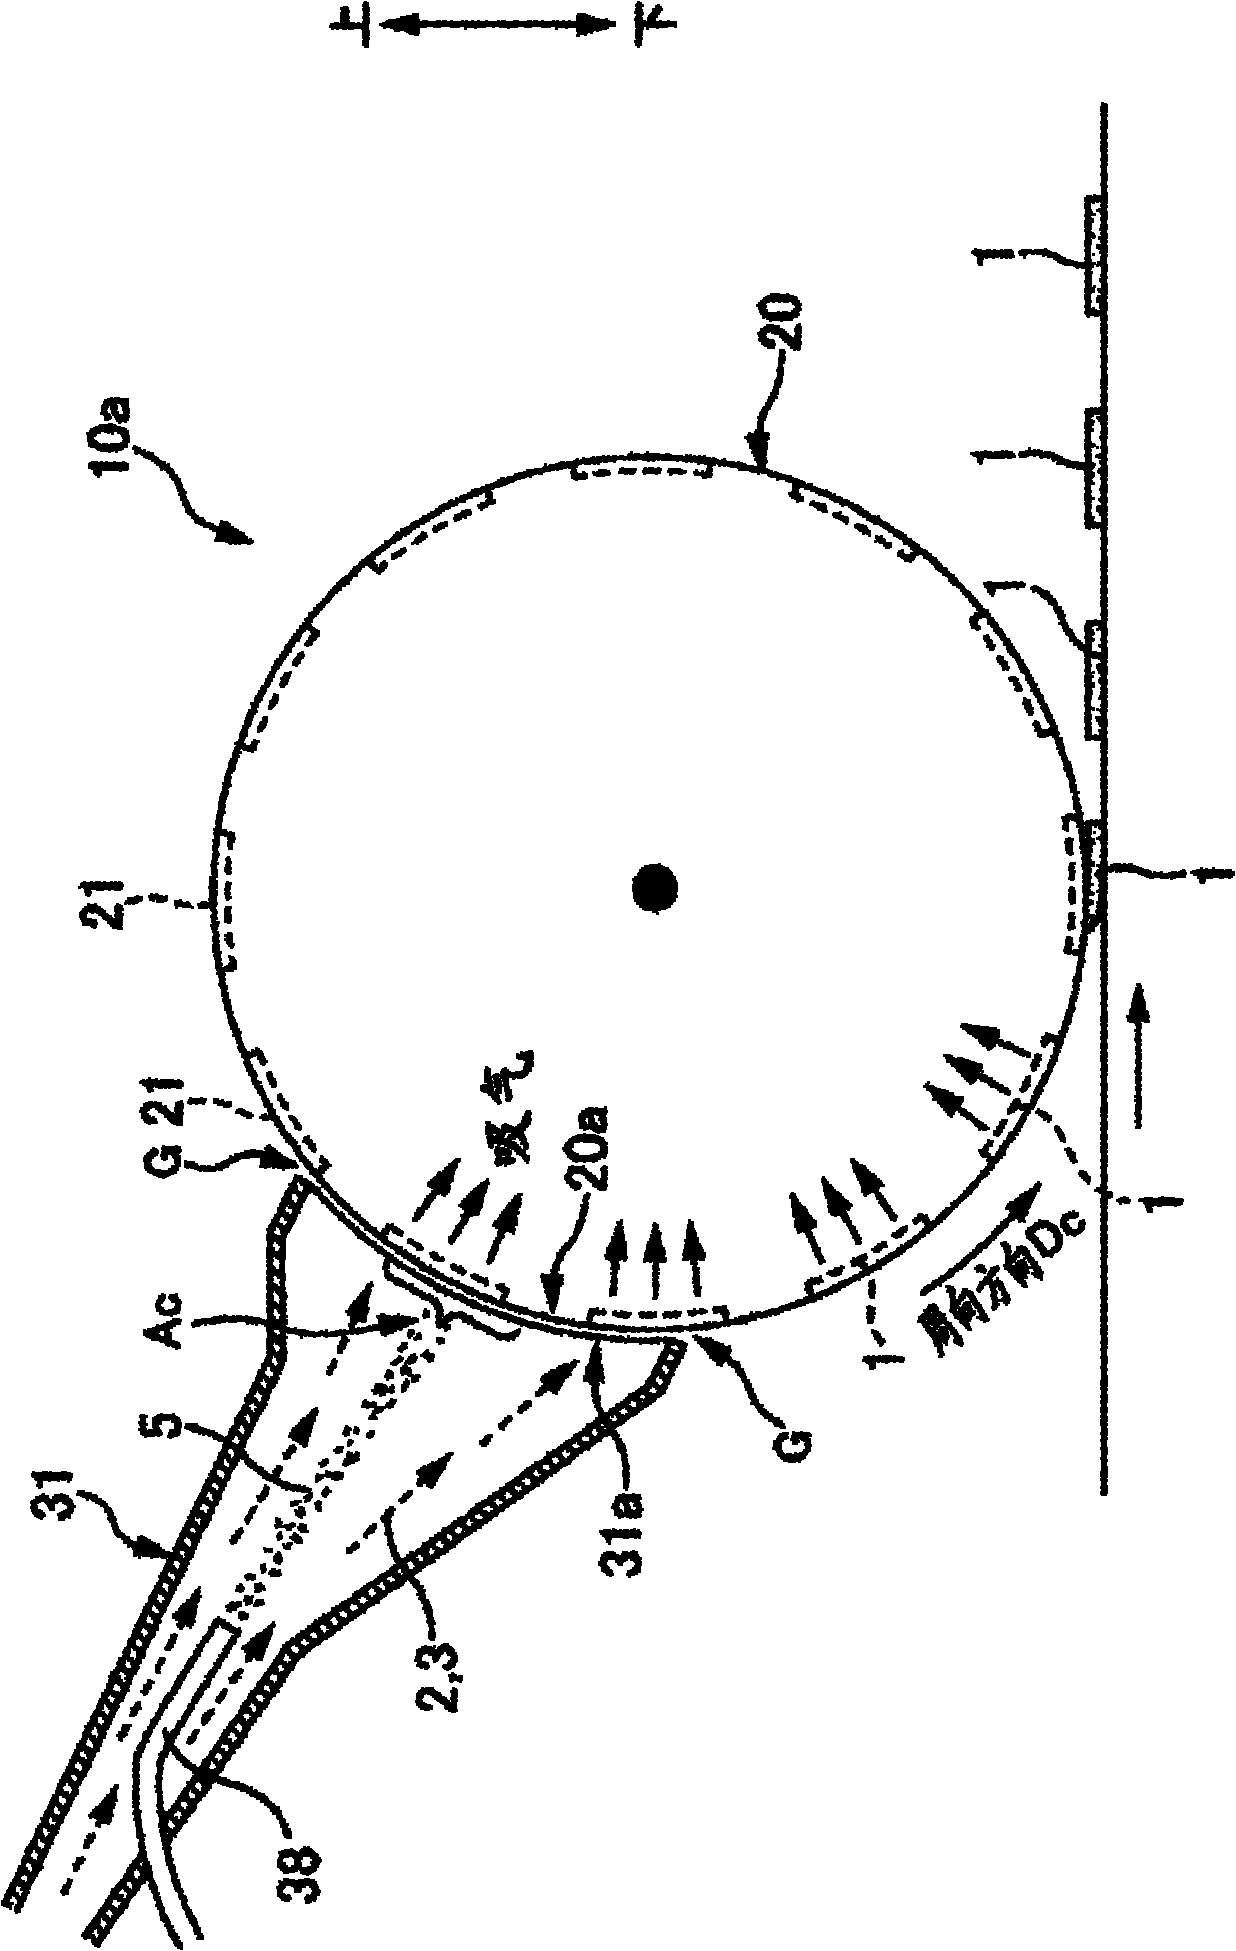 Apparatus and process for producing absorbent